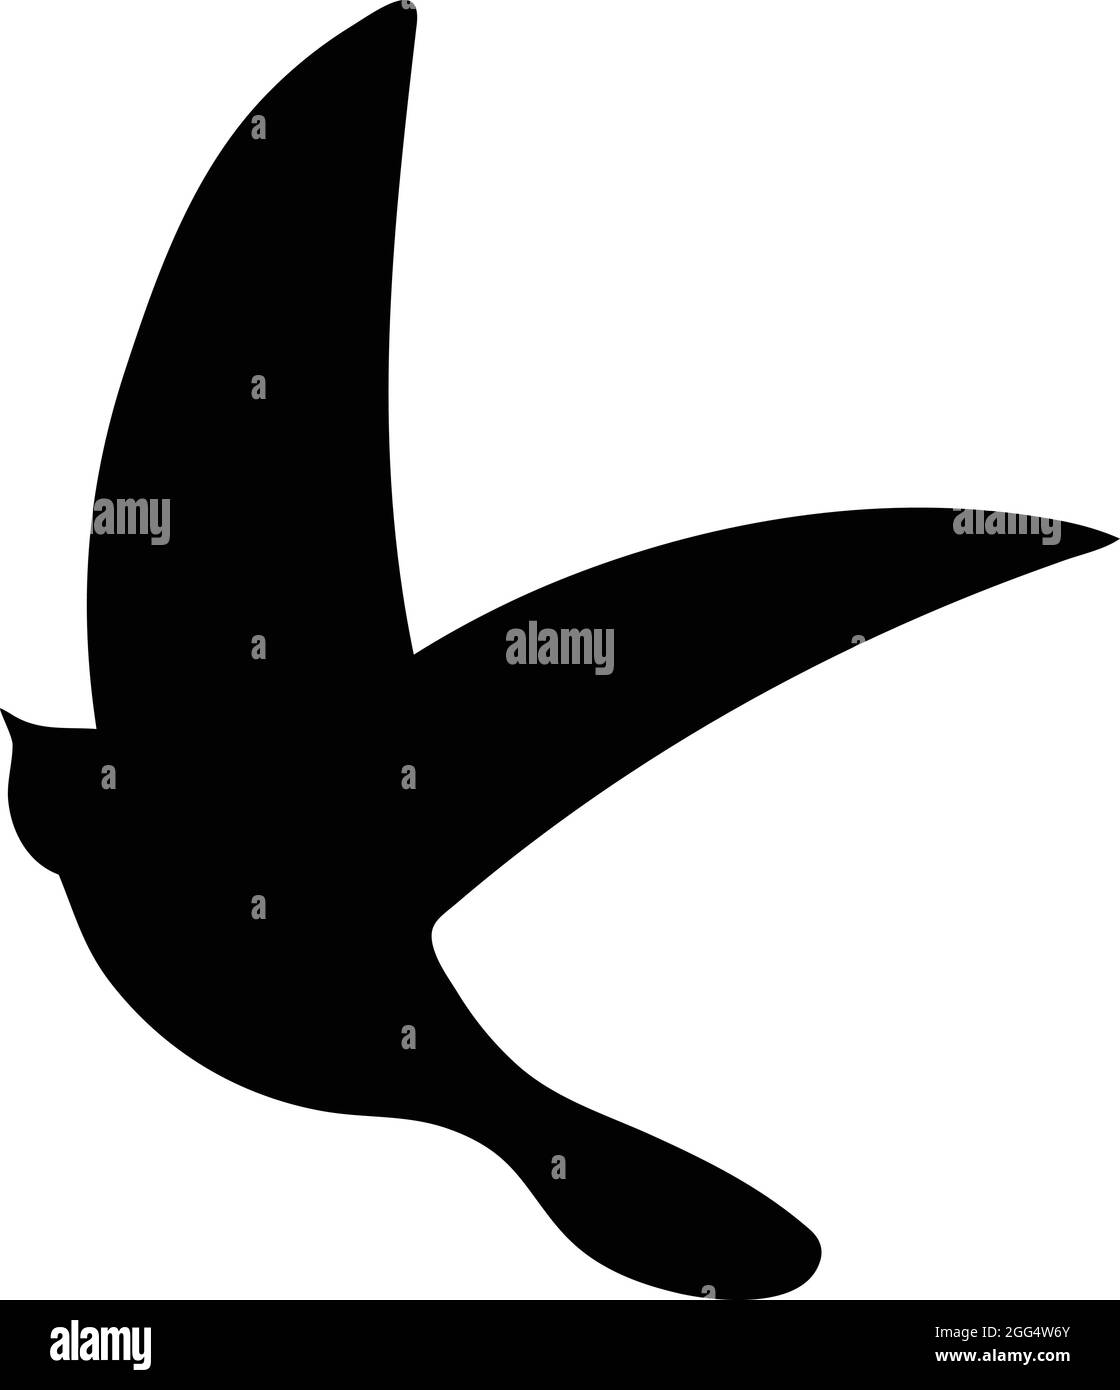 Black Bird Silhouette Against White Background No Sky. Free Vector Stock Vector